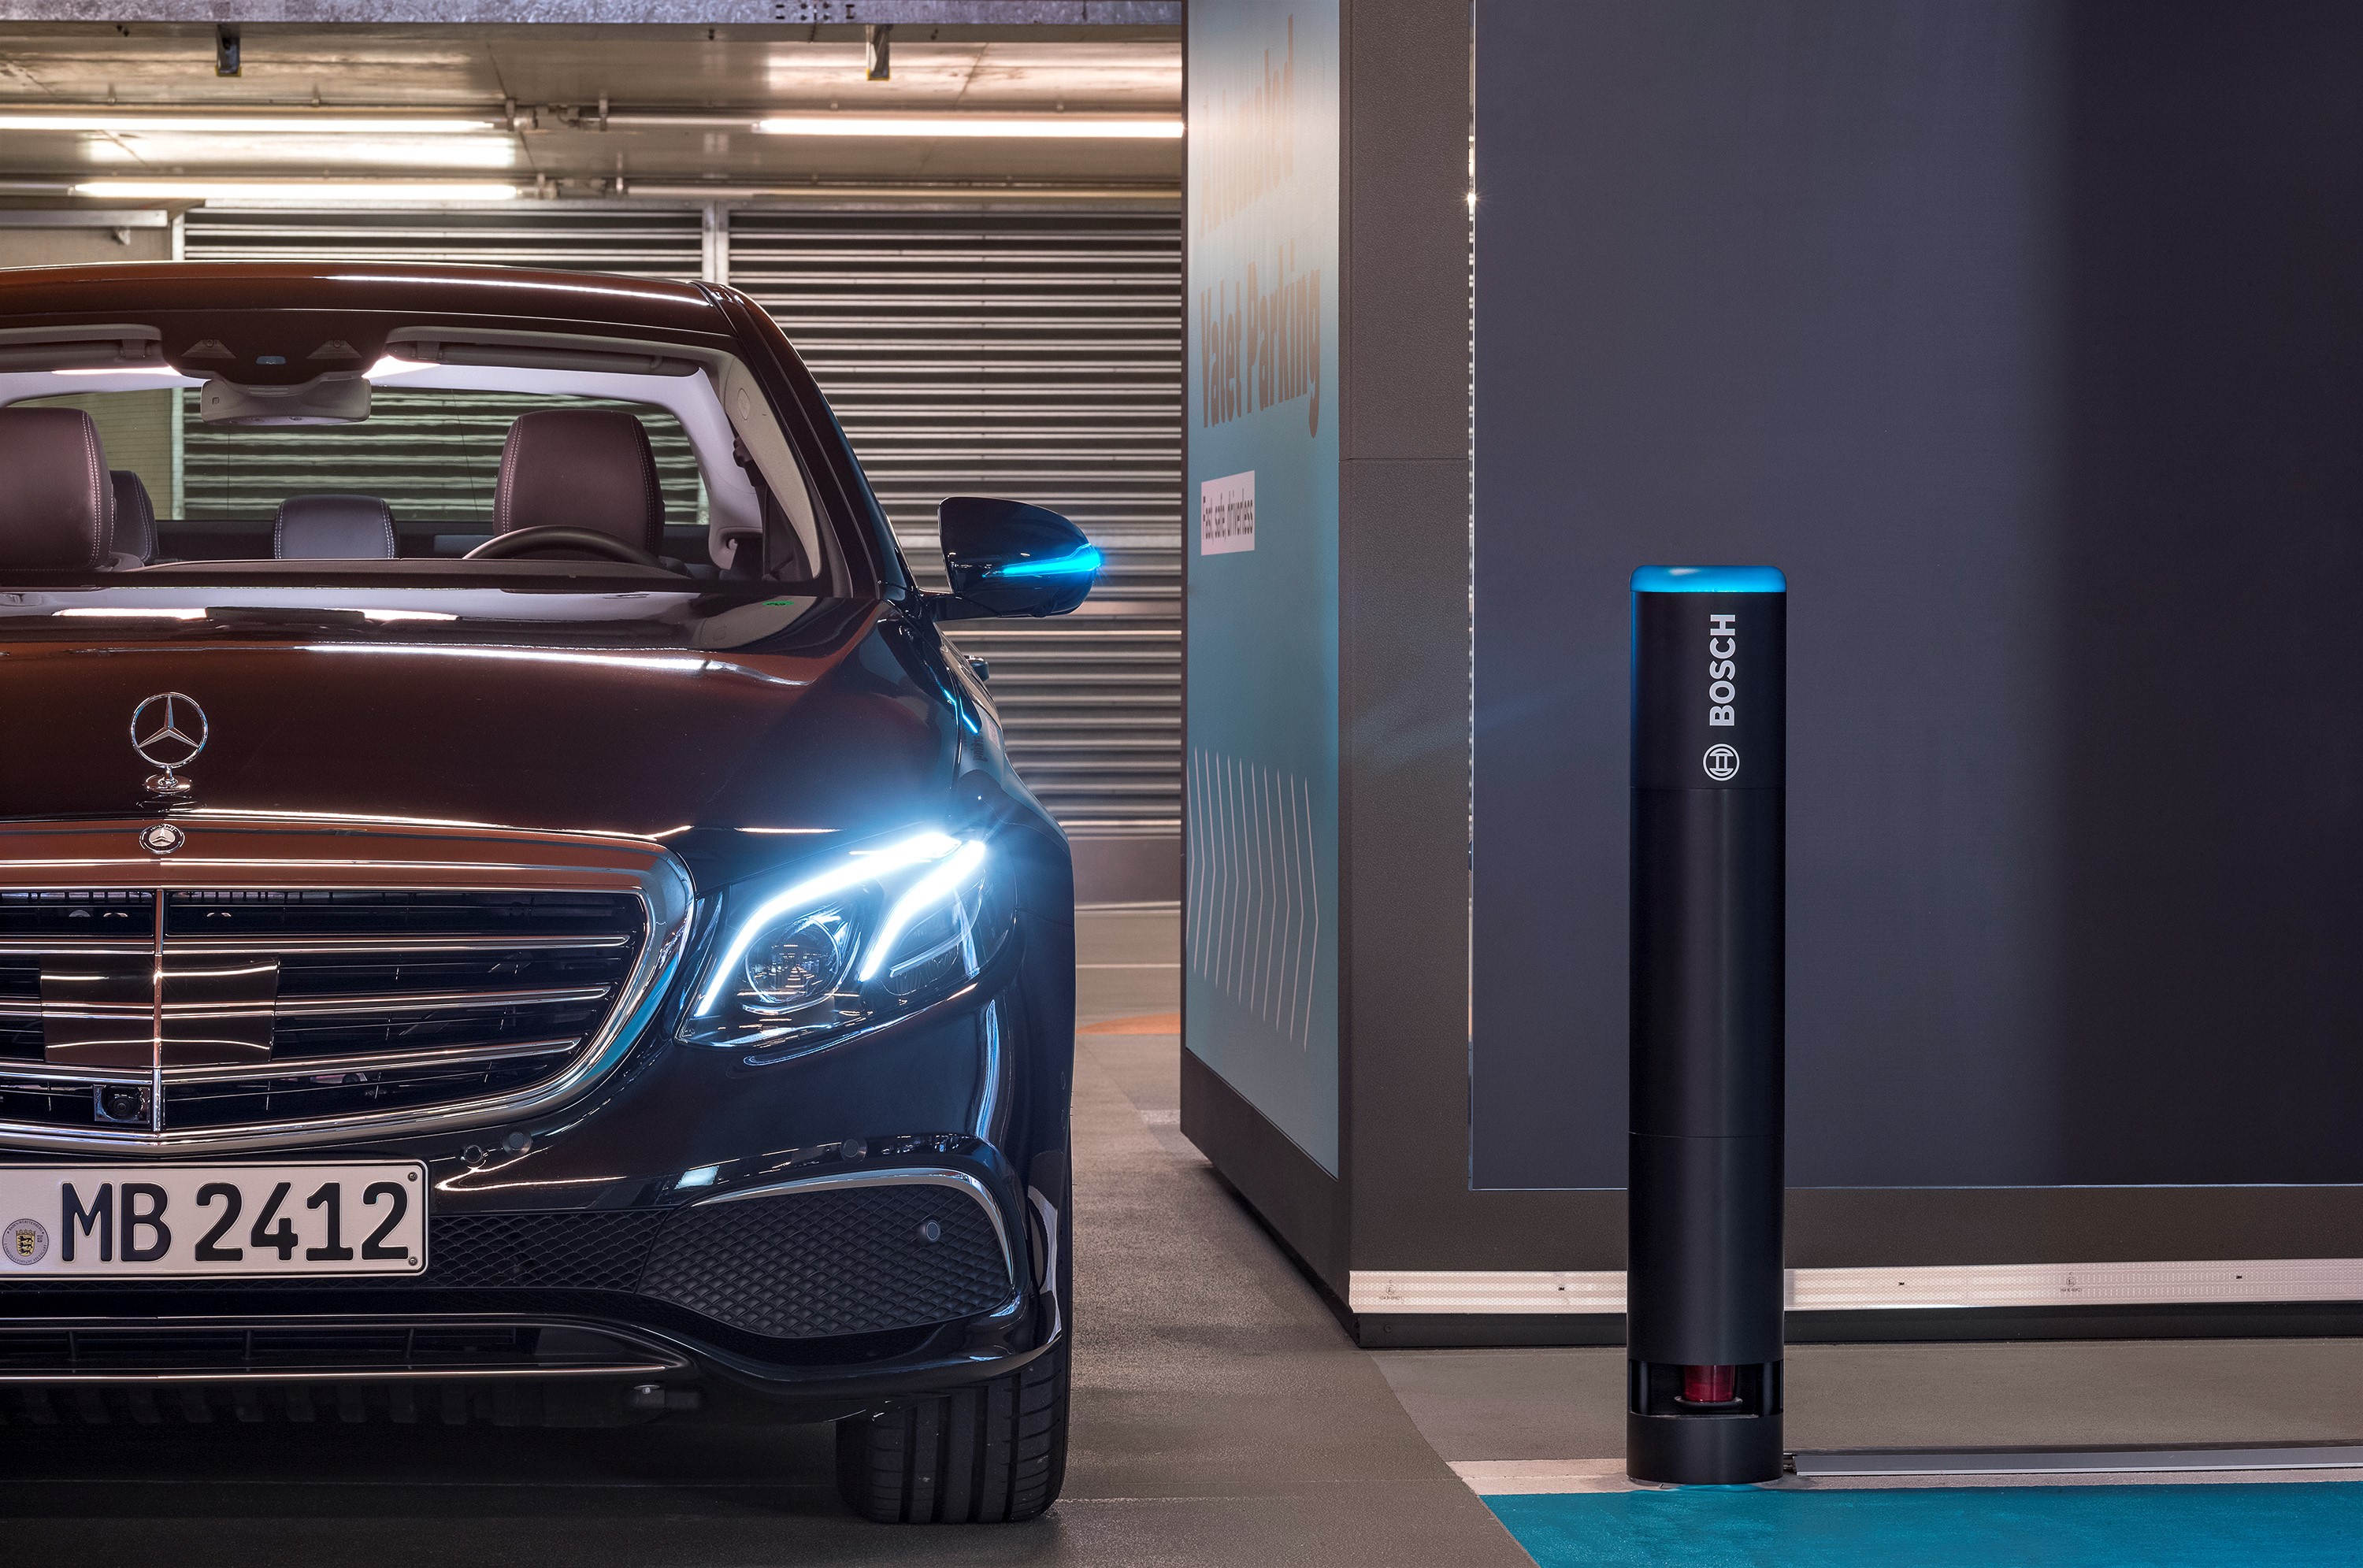 World first: Bosch and Daimler obtain approval for driverless parking without human supervision